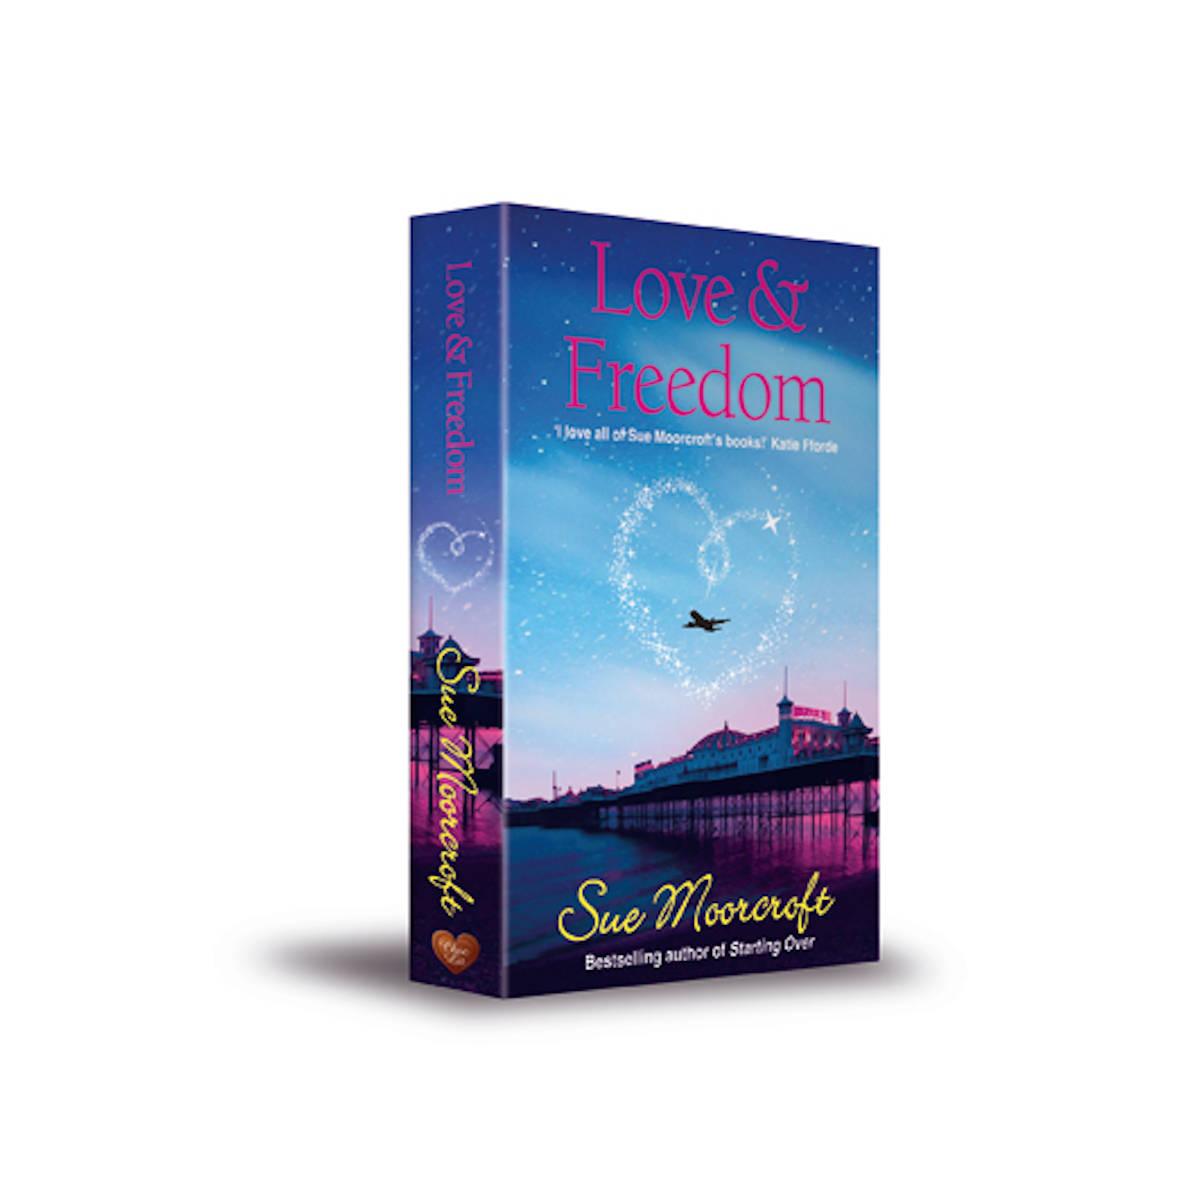 image shows: Love & Freedom